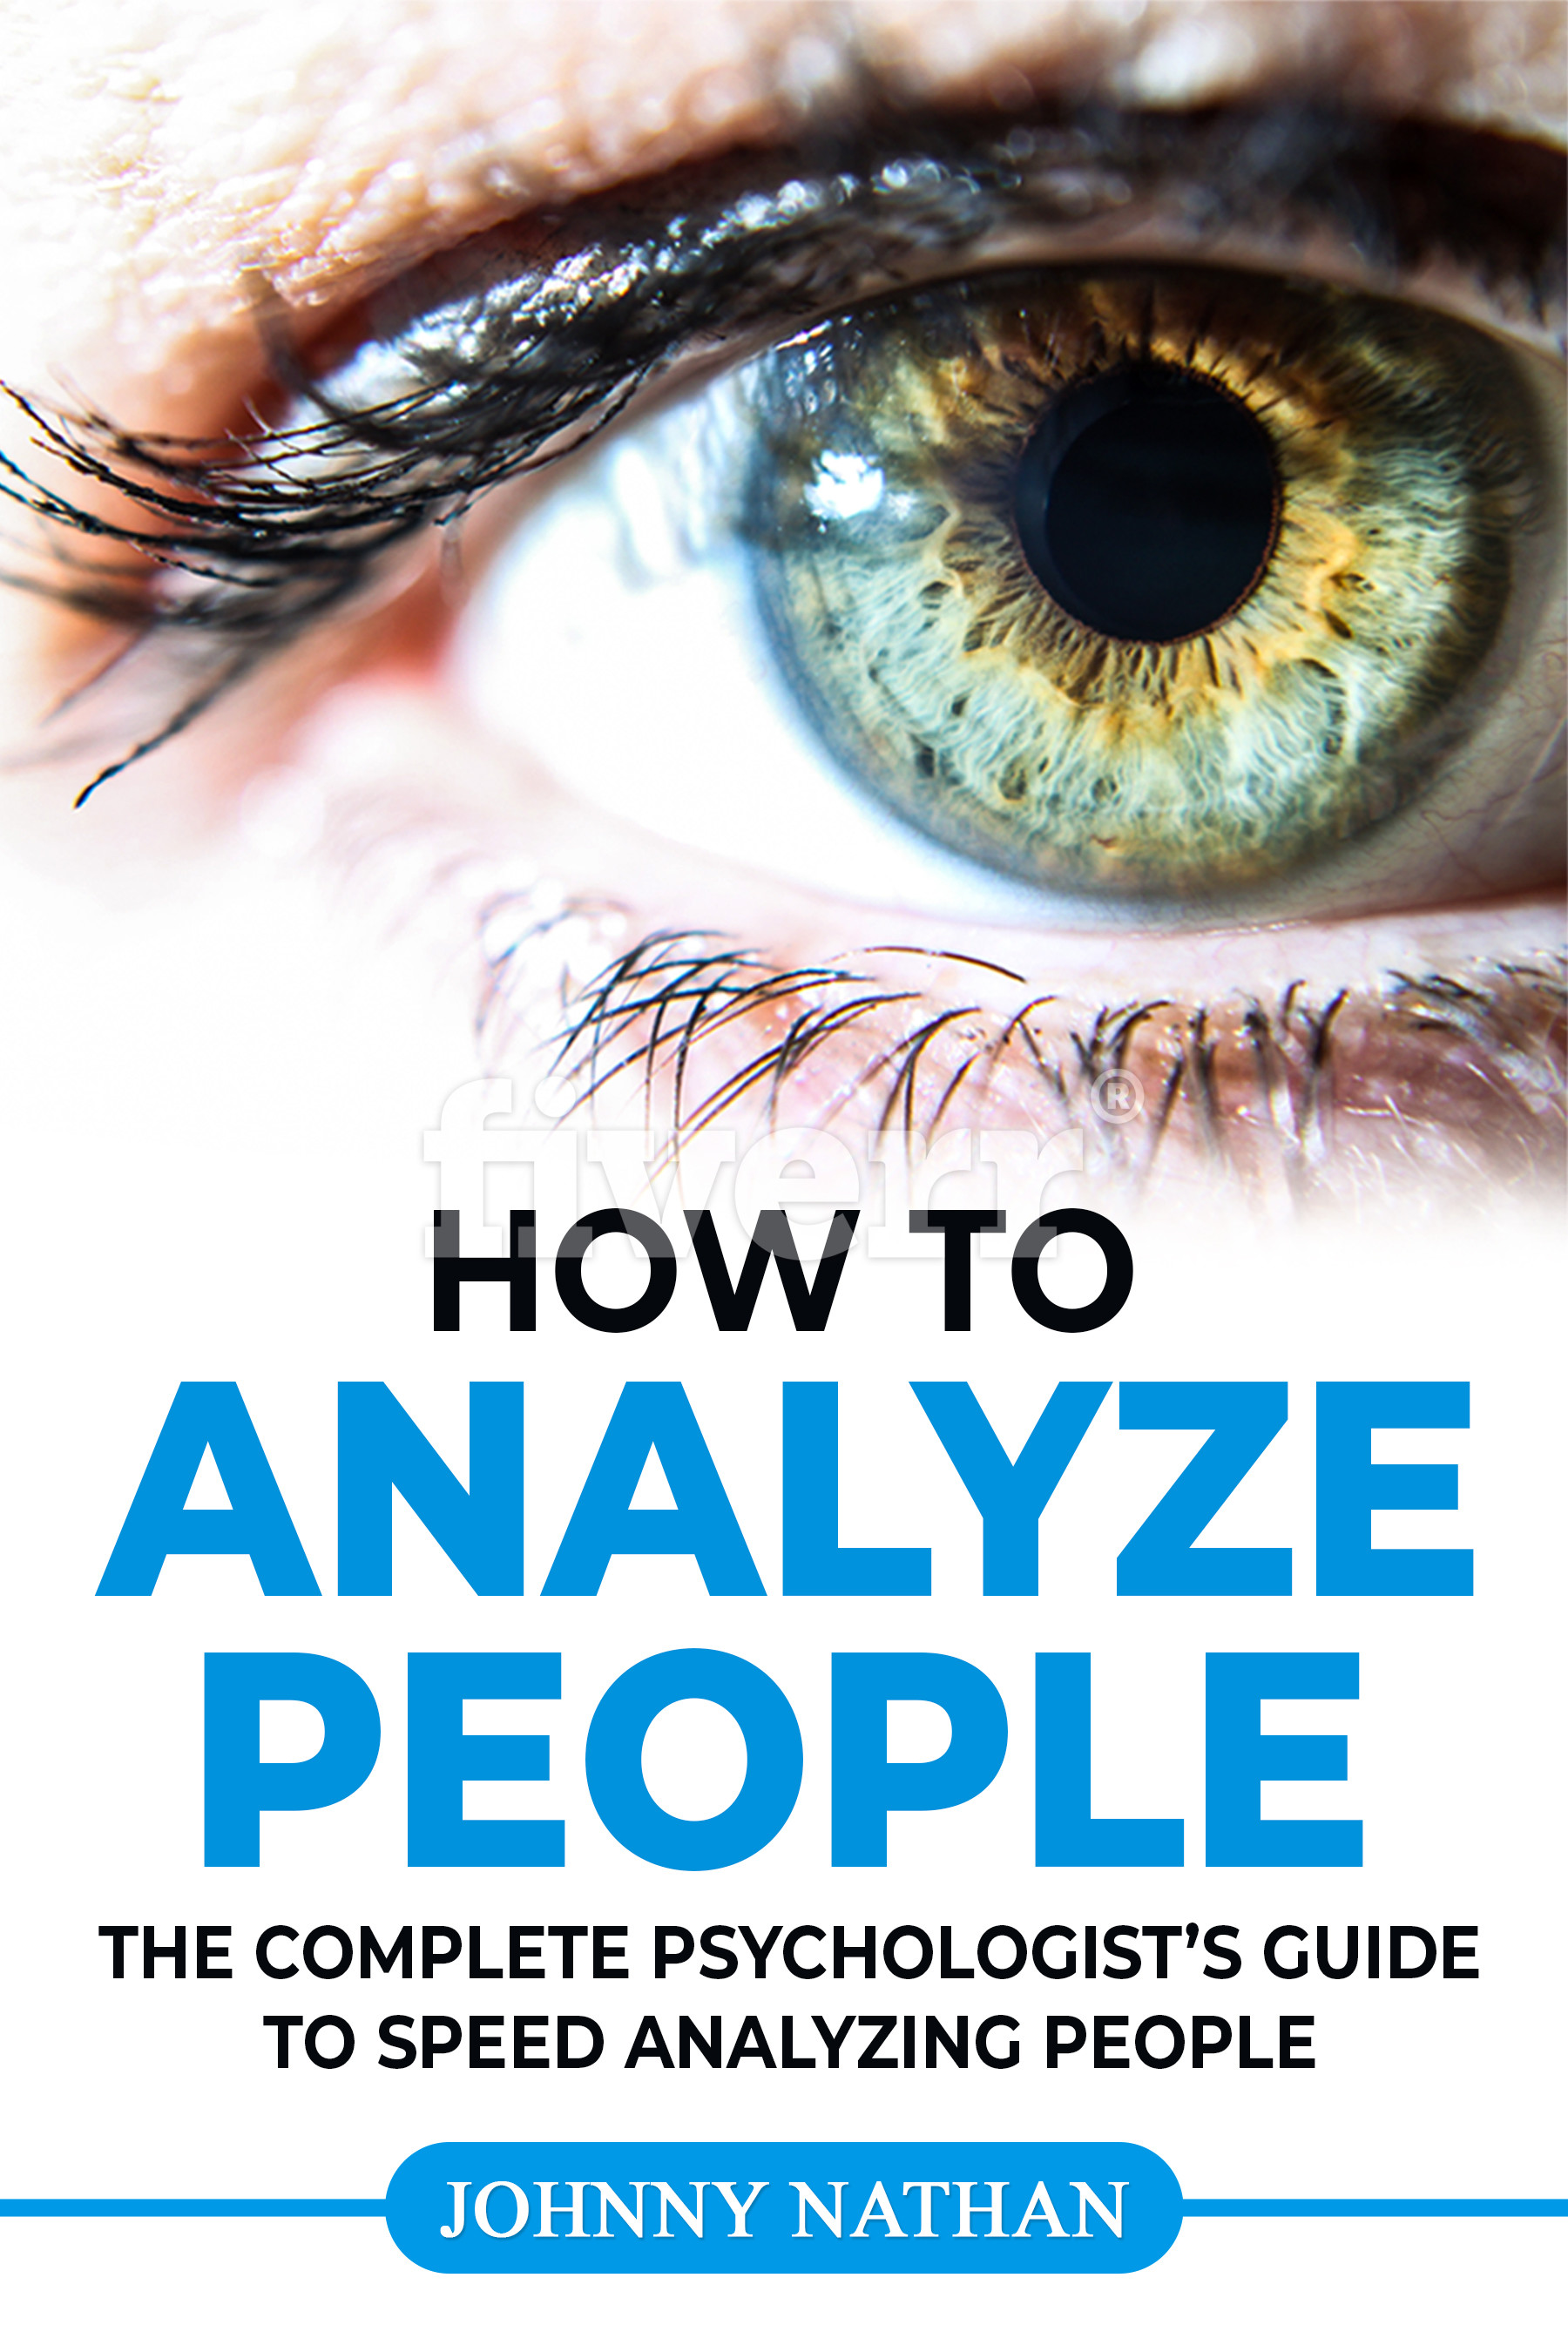 FREE: How to analyze people by Johnny Nathan